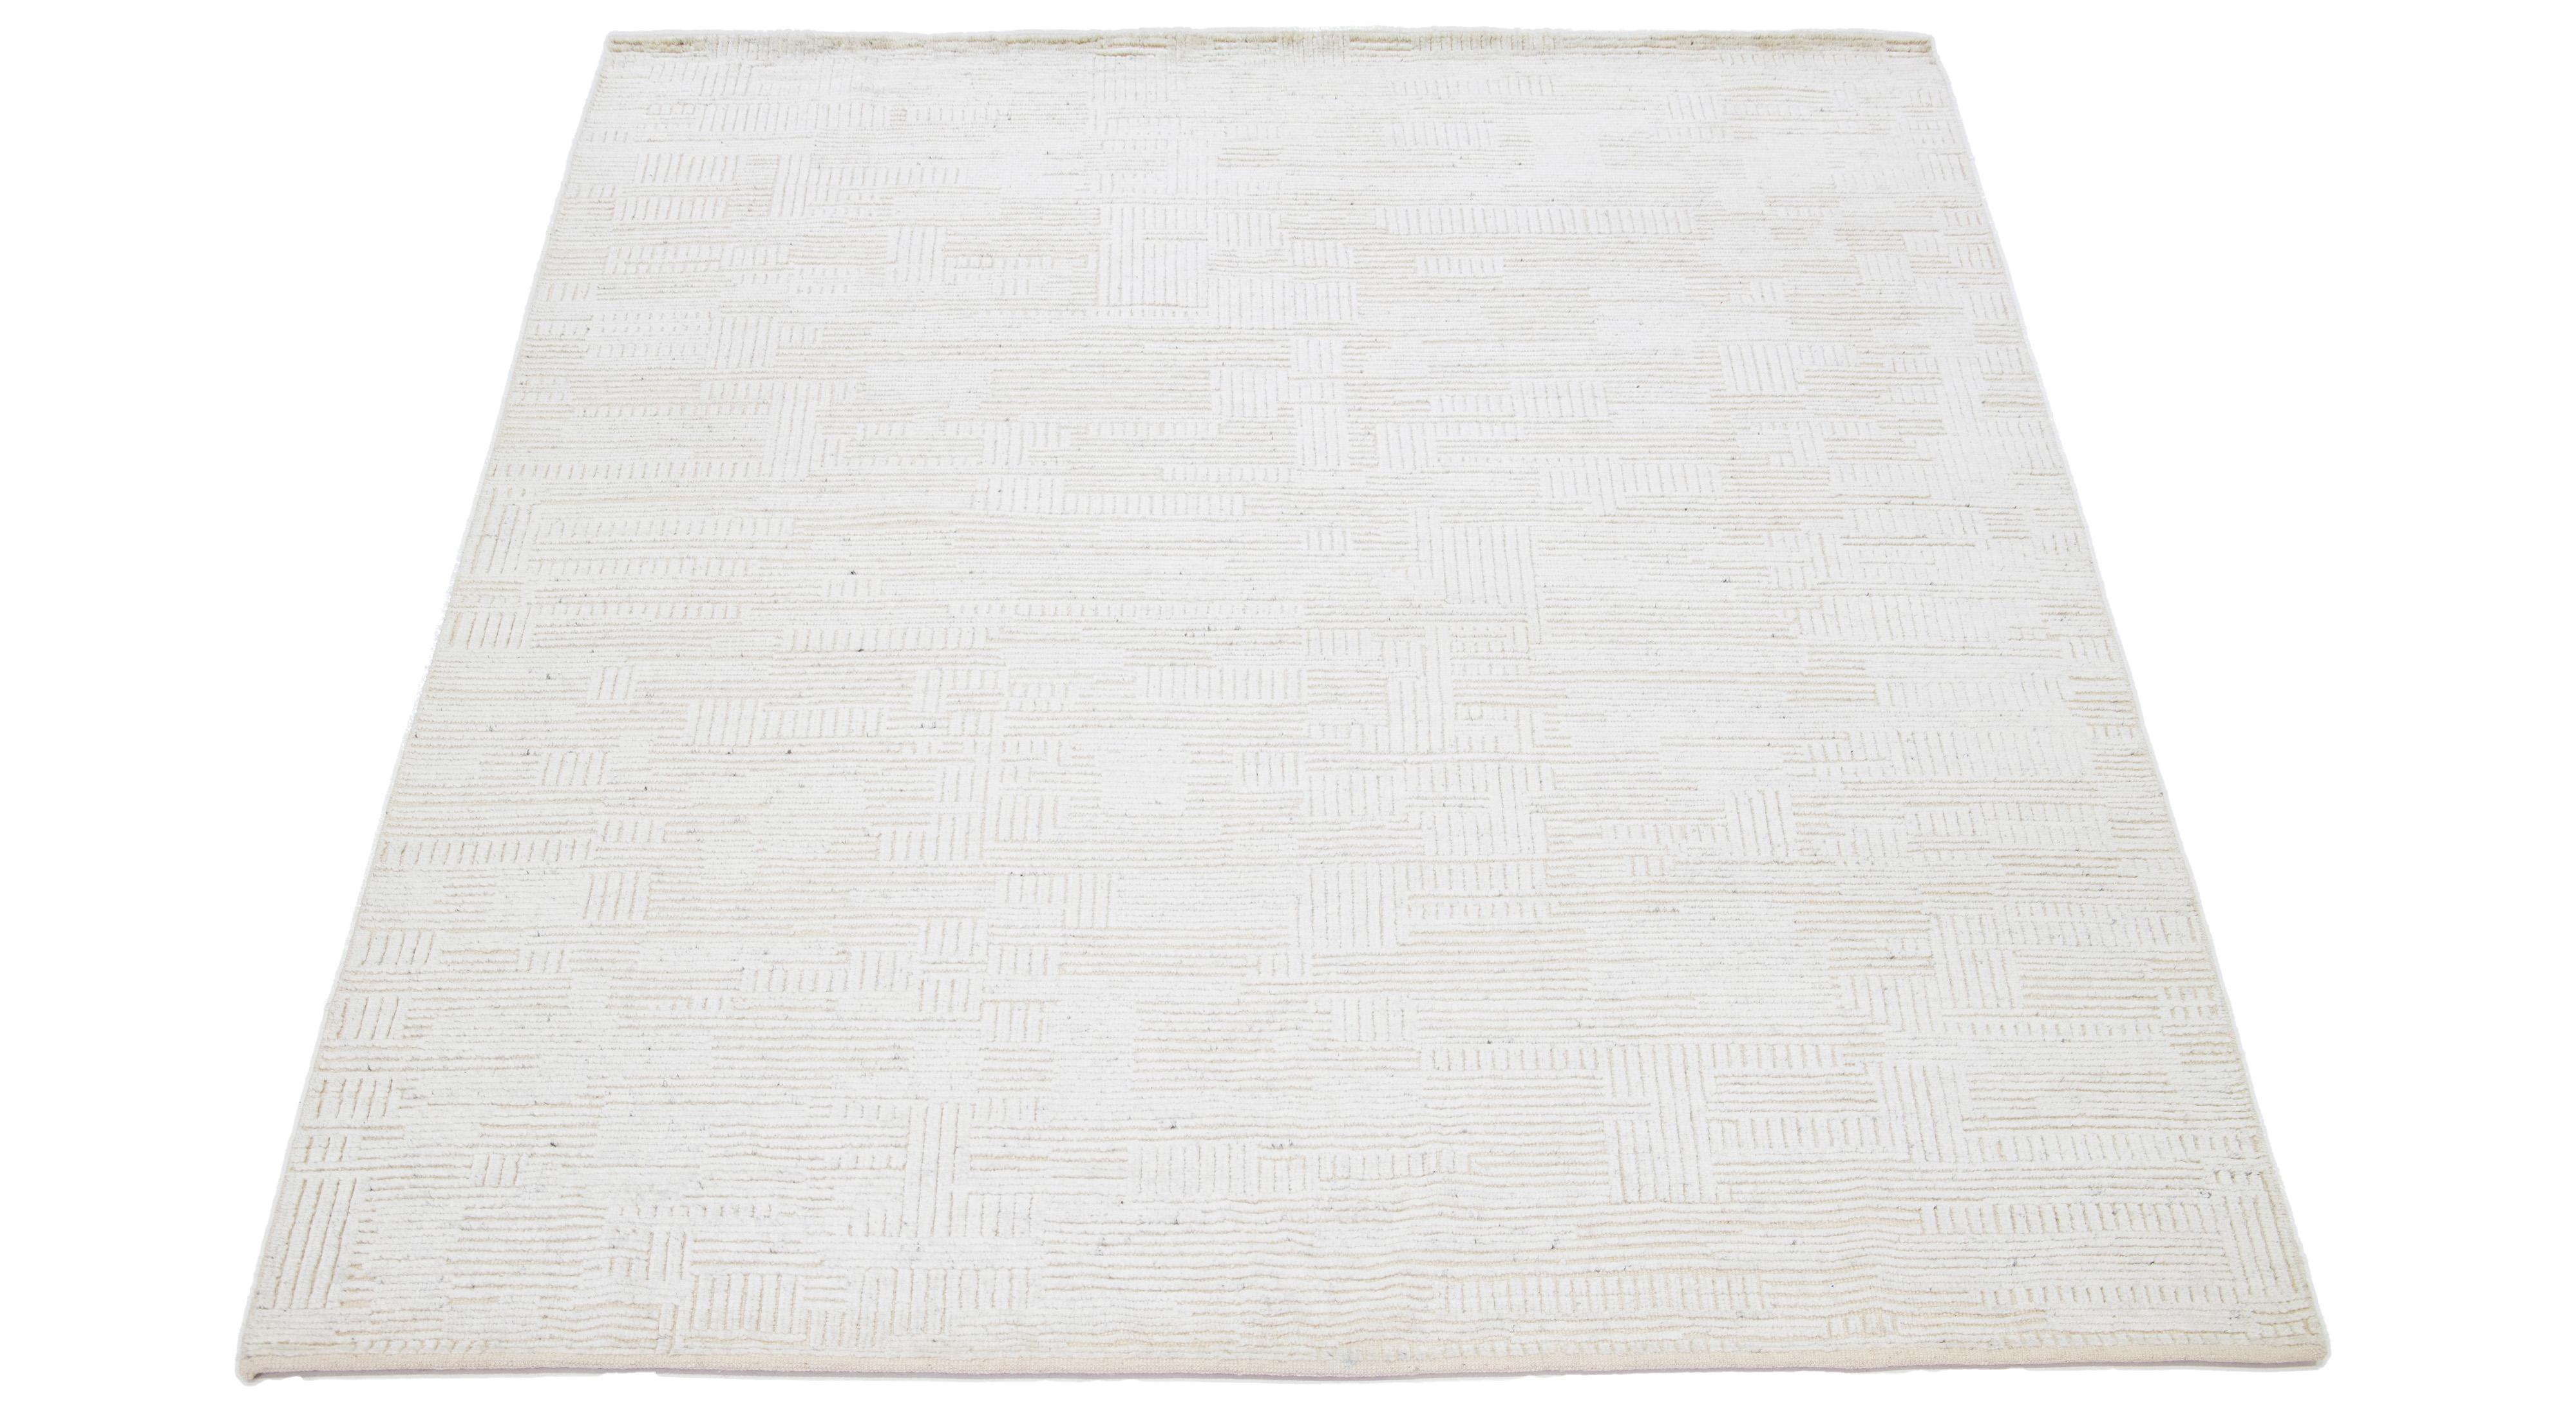 This hand-knotted wool rug showcases a modern Moroccan-inspired motif highlighting understated natural ivory hues against a bold beige foundation, creating a captivating geometric seamless pattern.

This rug measures 8' x 10'.

